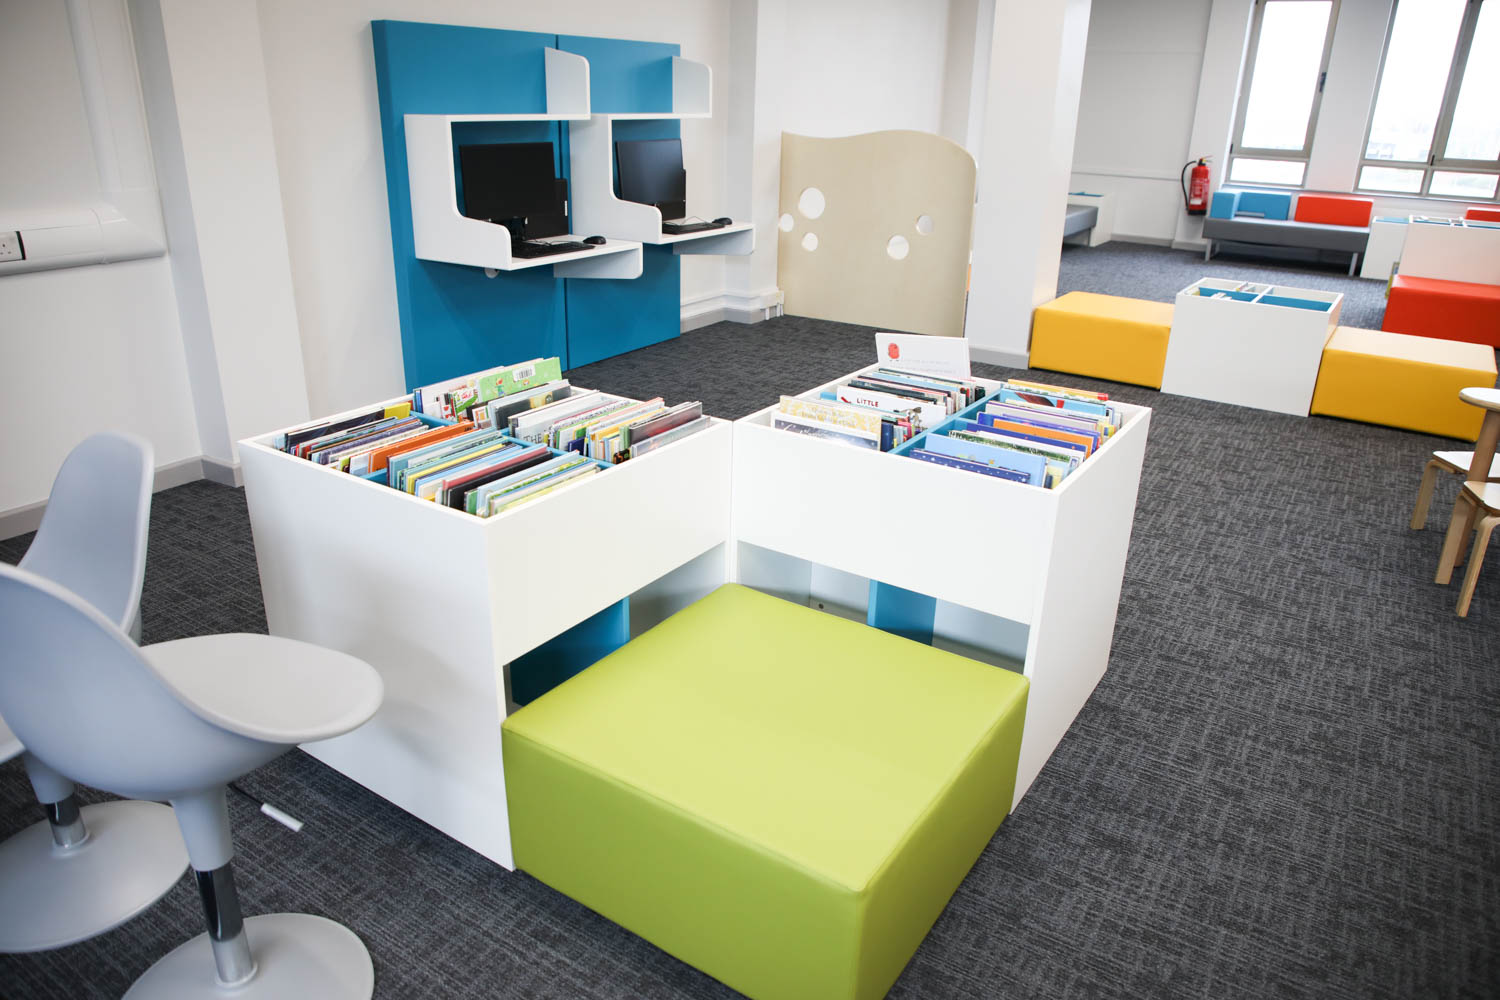 Books in a library and comfortable seating area